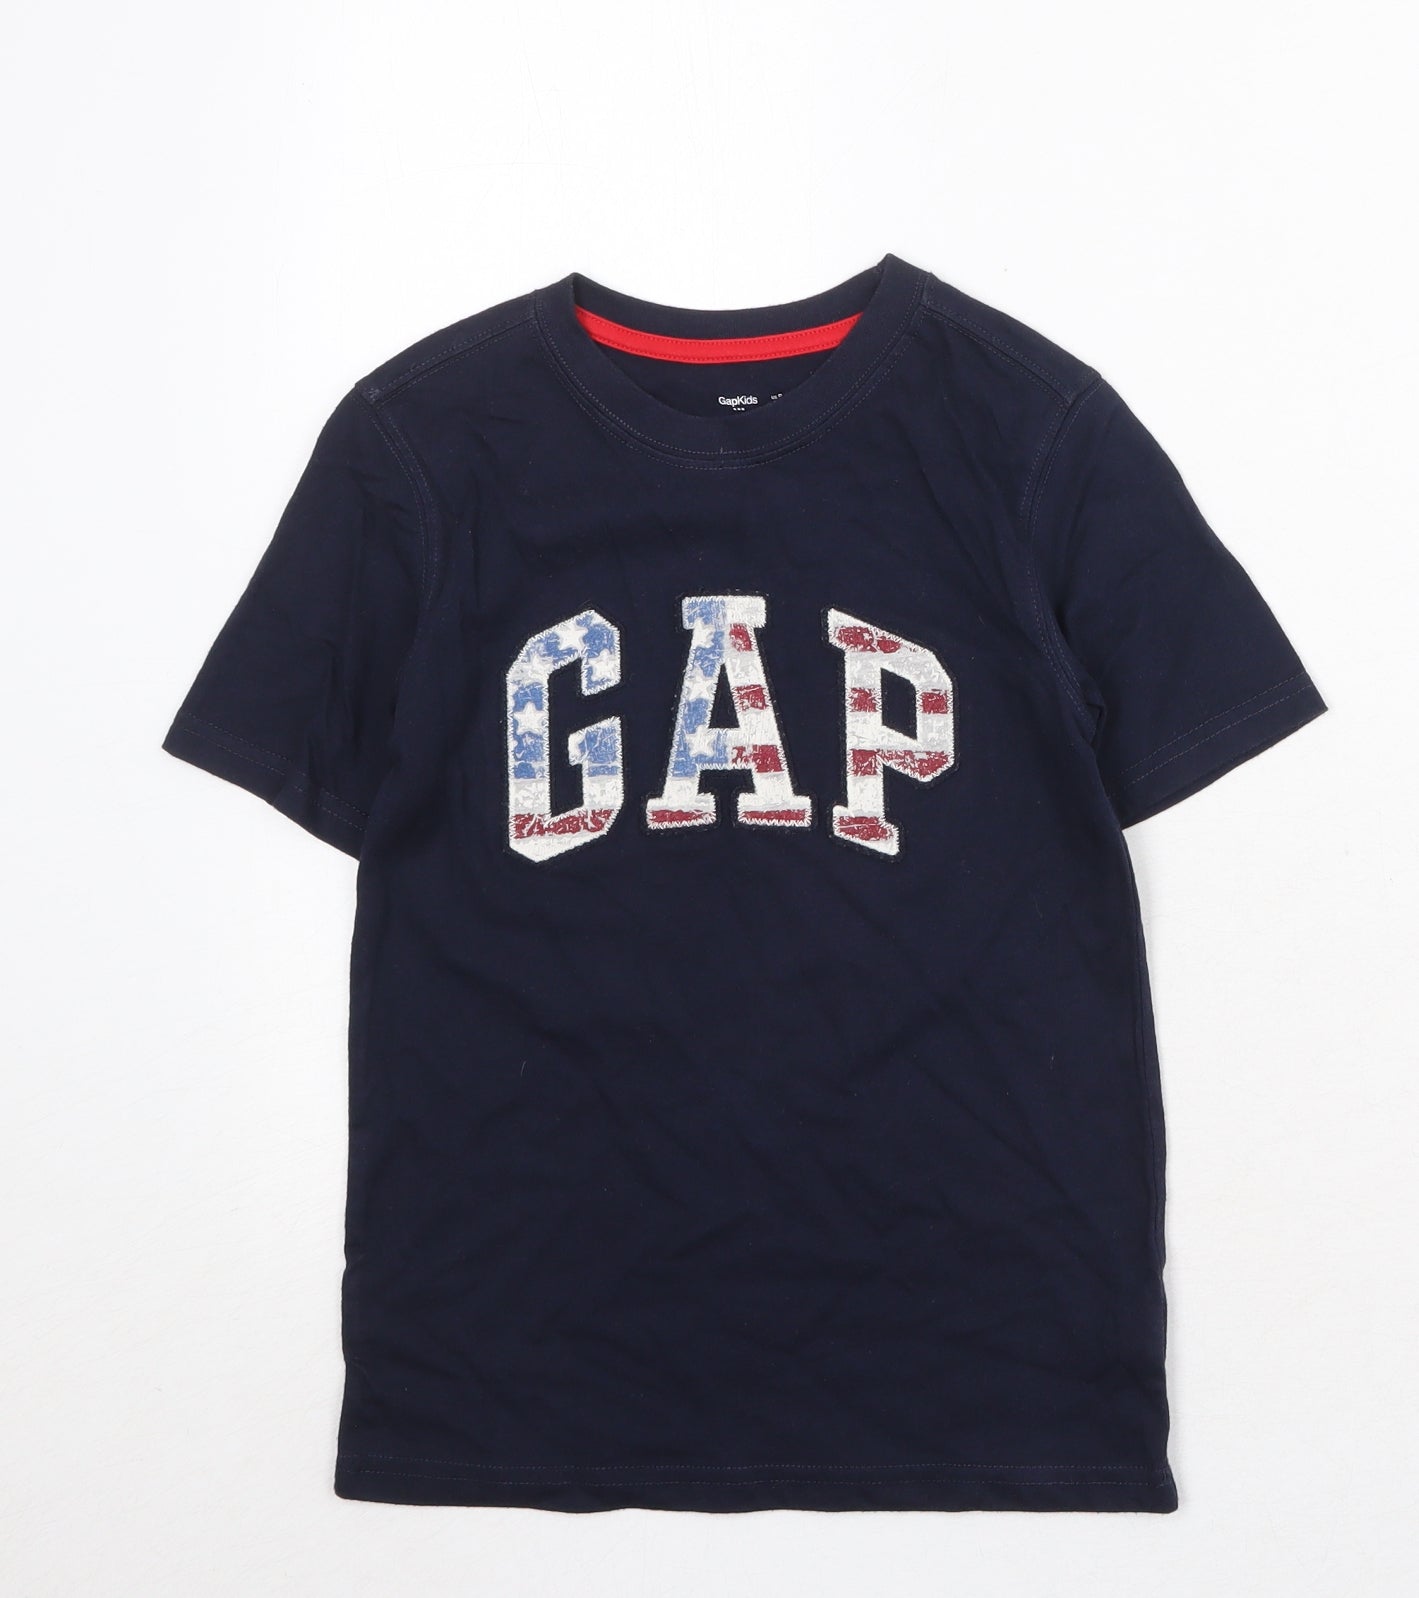 Gap Boys Blue Cotton Basic T-Shirt Size 6-7 Years Crew Neck Pullover